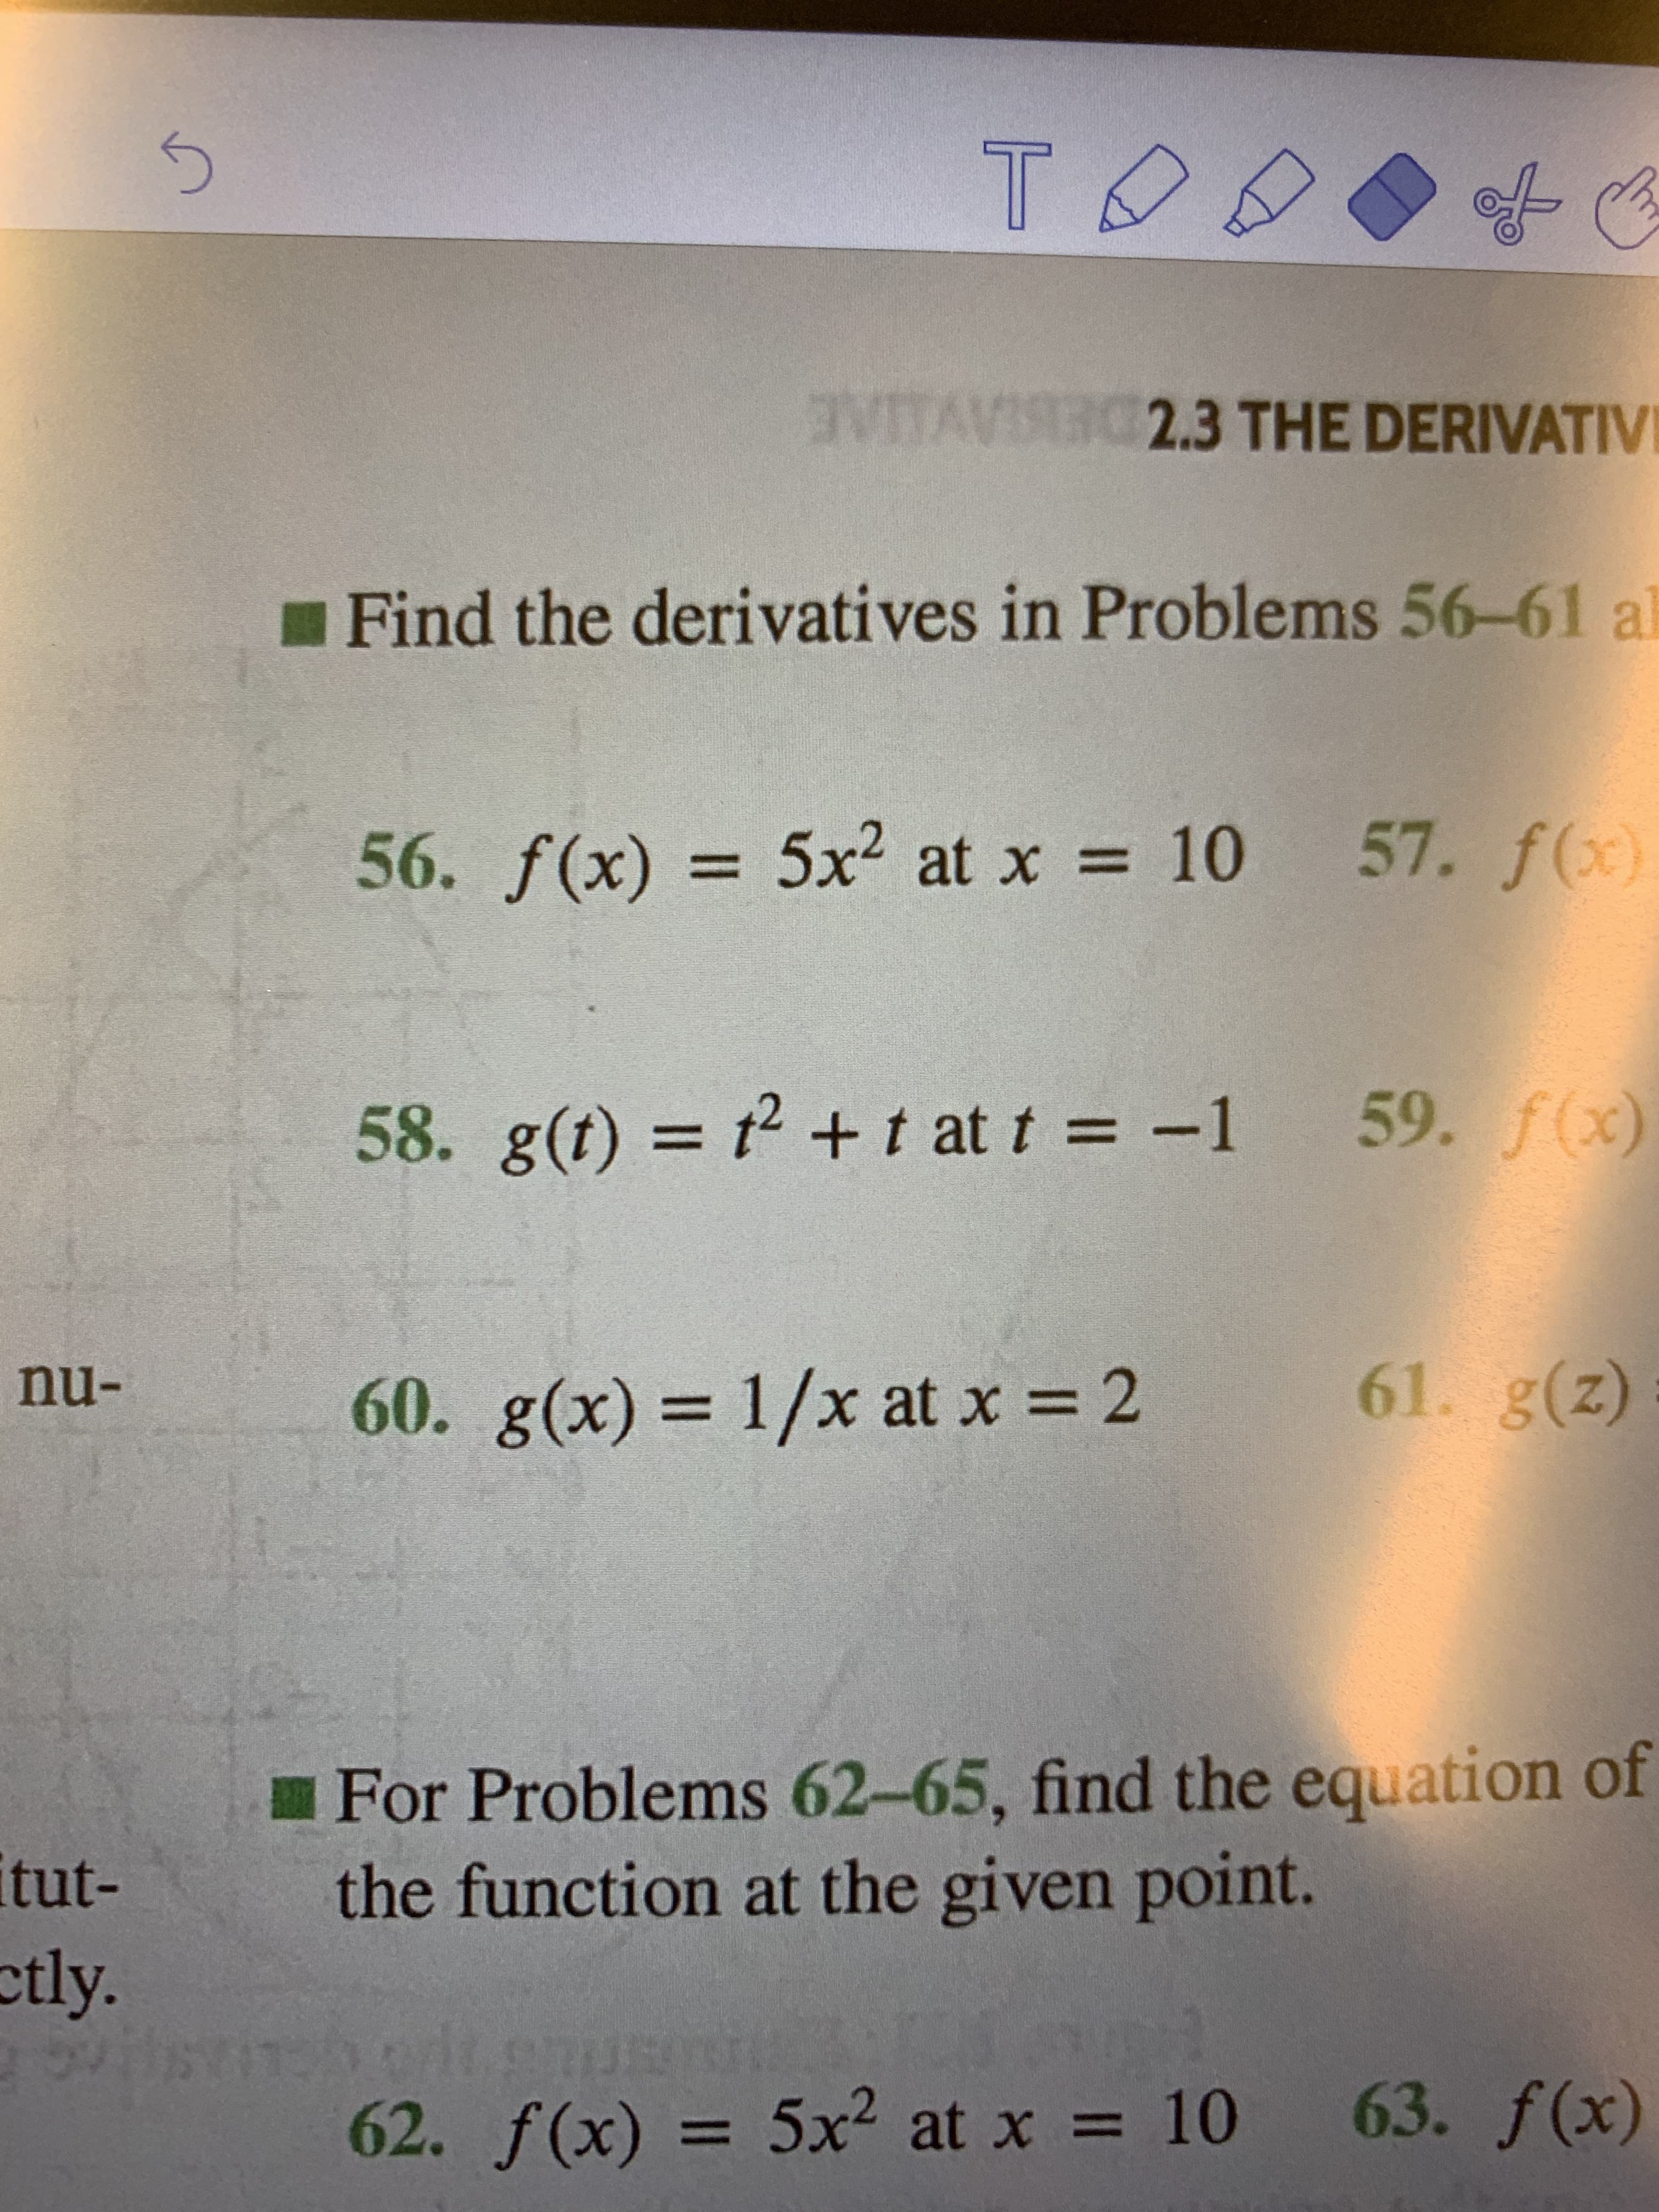 T
VTAIG23 THE DERIVATIV
Find the derivatives in Problems 56-61
a
57. f(x)
10
56. f(x)= 5x2 at x
59. f(x)
58. g(t) 2 + t at t = -1
61. g(z)
nu-
60. g(x) 1/x at x 2
For Problems 62-65, find the equation of
the function at the given point.
itut-
etly.
eh orlt emusn
62. f(x) 5x2 at x
63. f(x)
10
